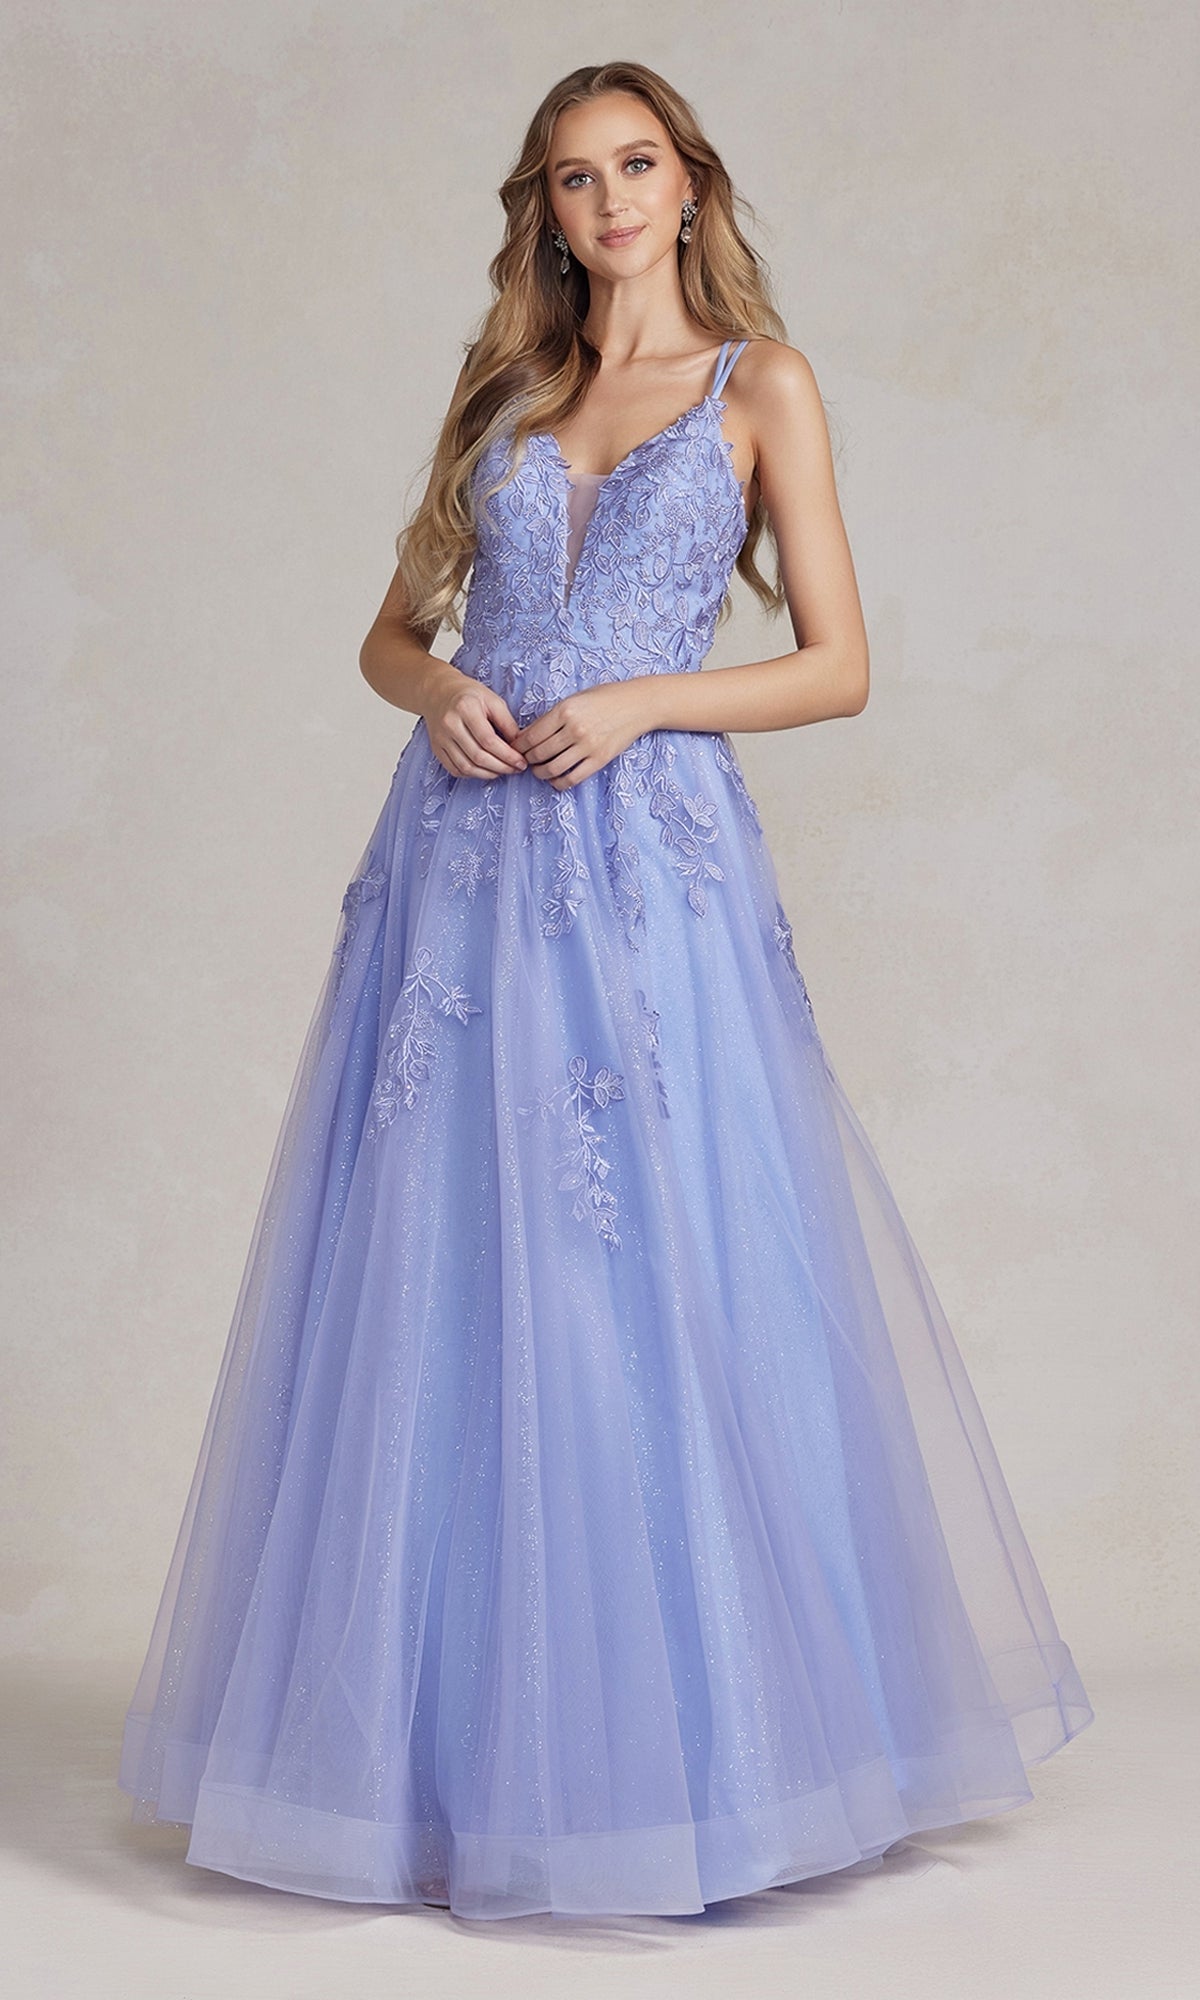 Periwinkle Embroidered-Lace Long Prom Ball Gown with Corset